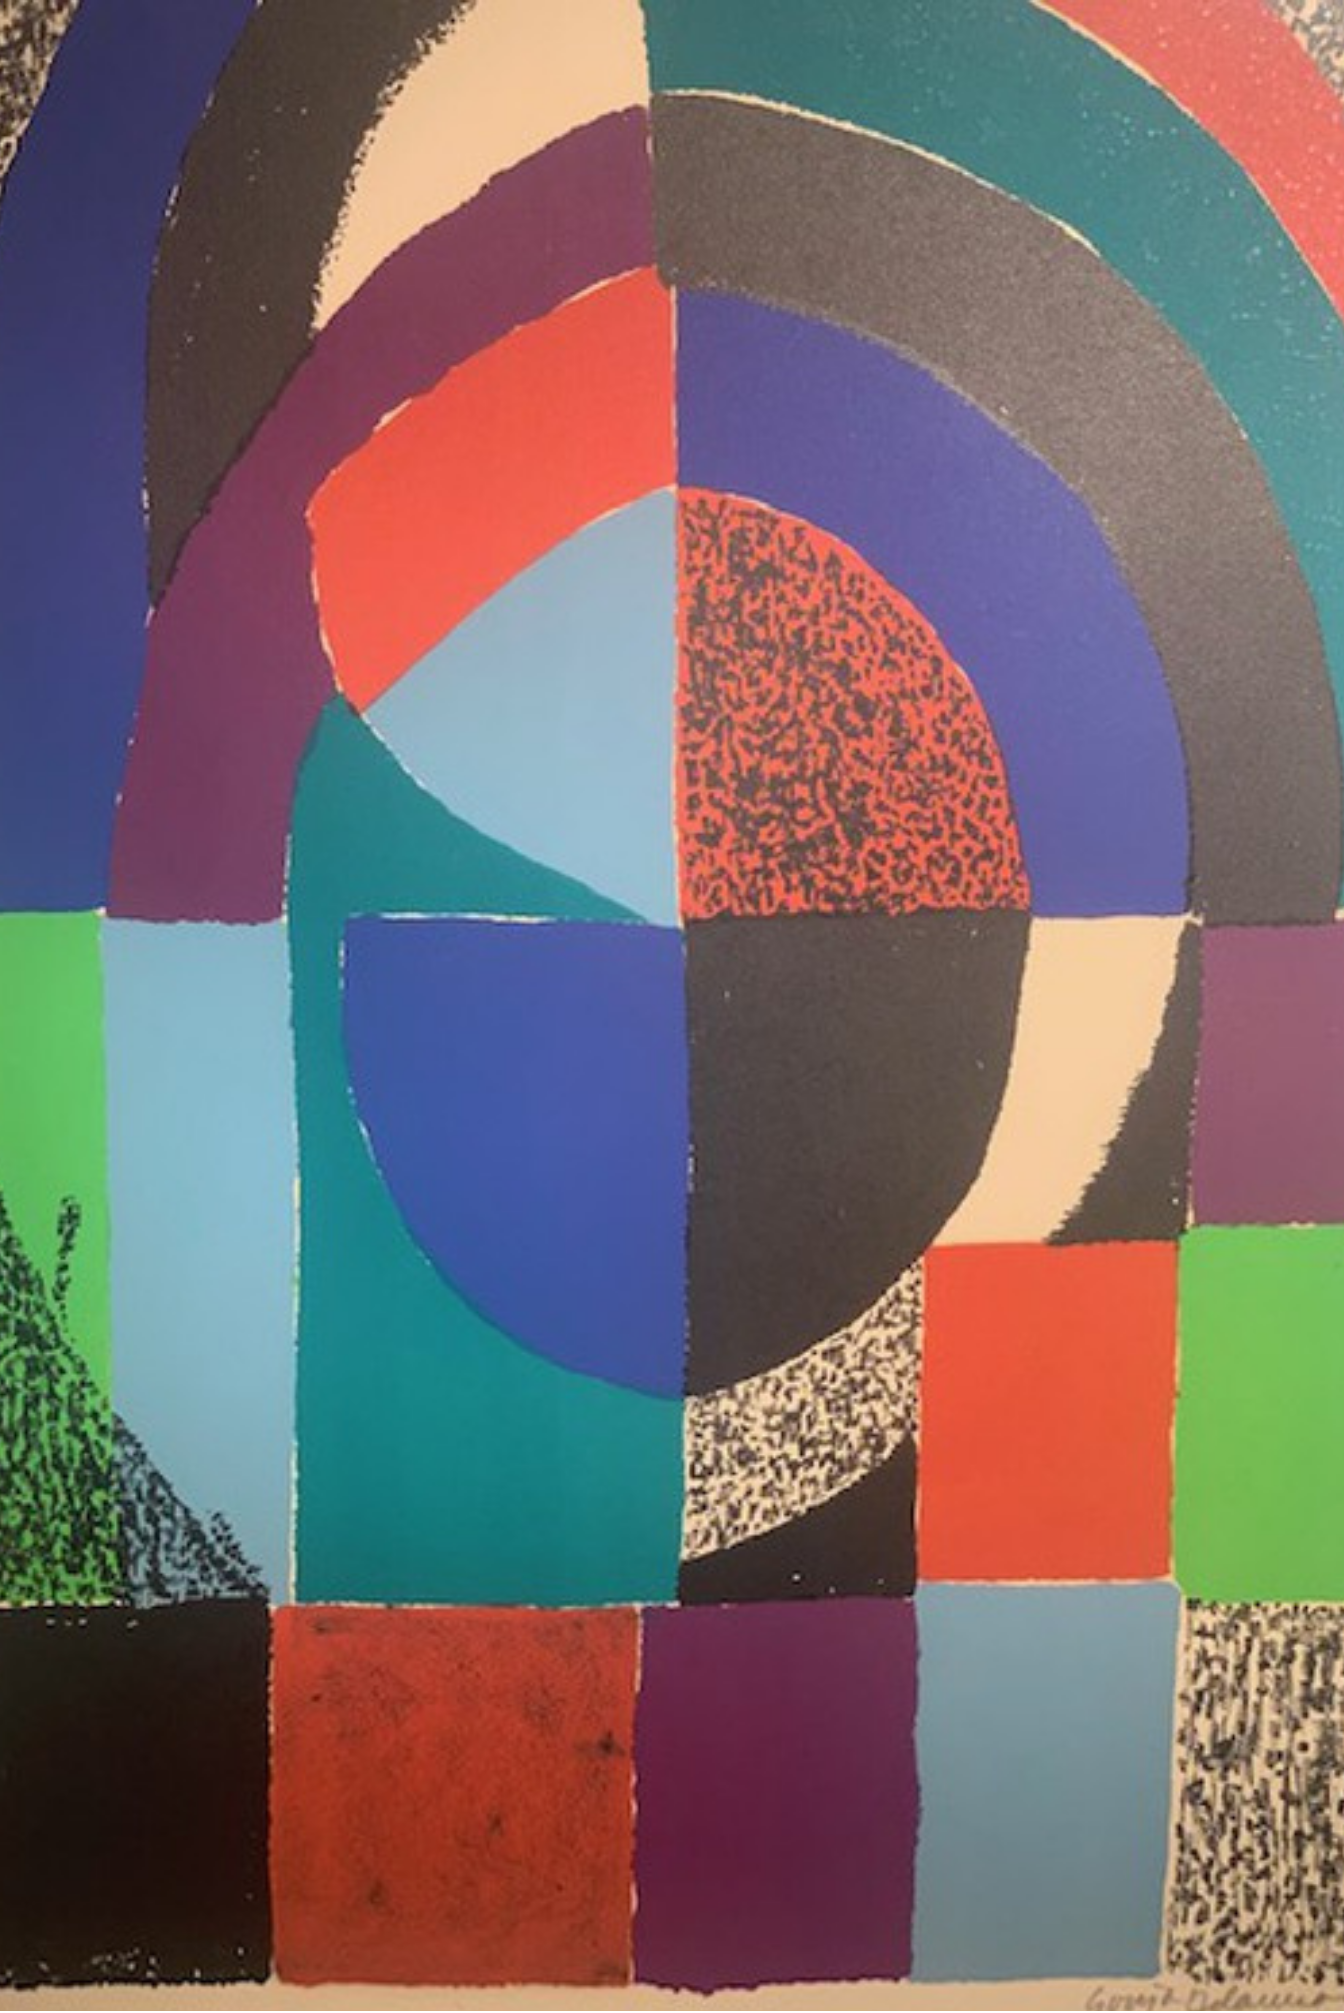 Sonia Delaunay, Cathedrale, 1971